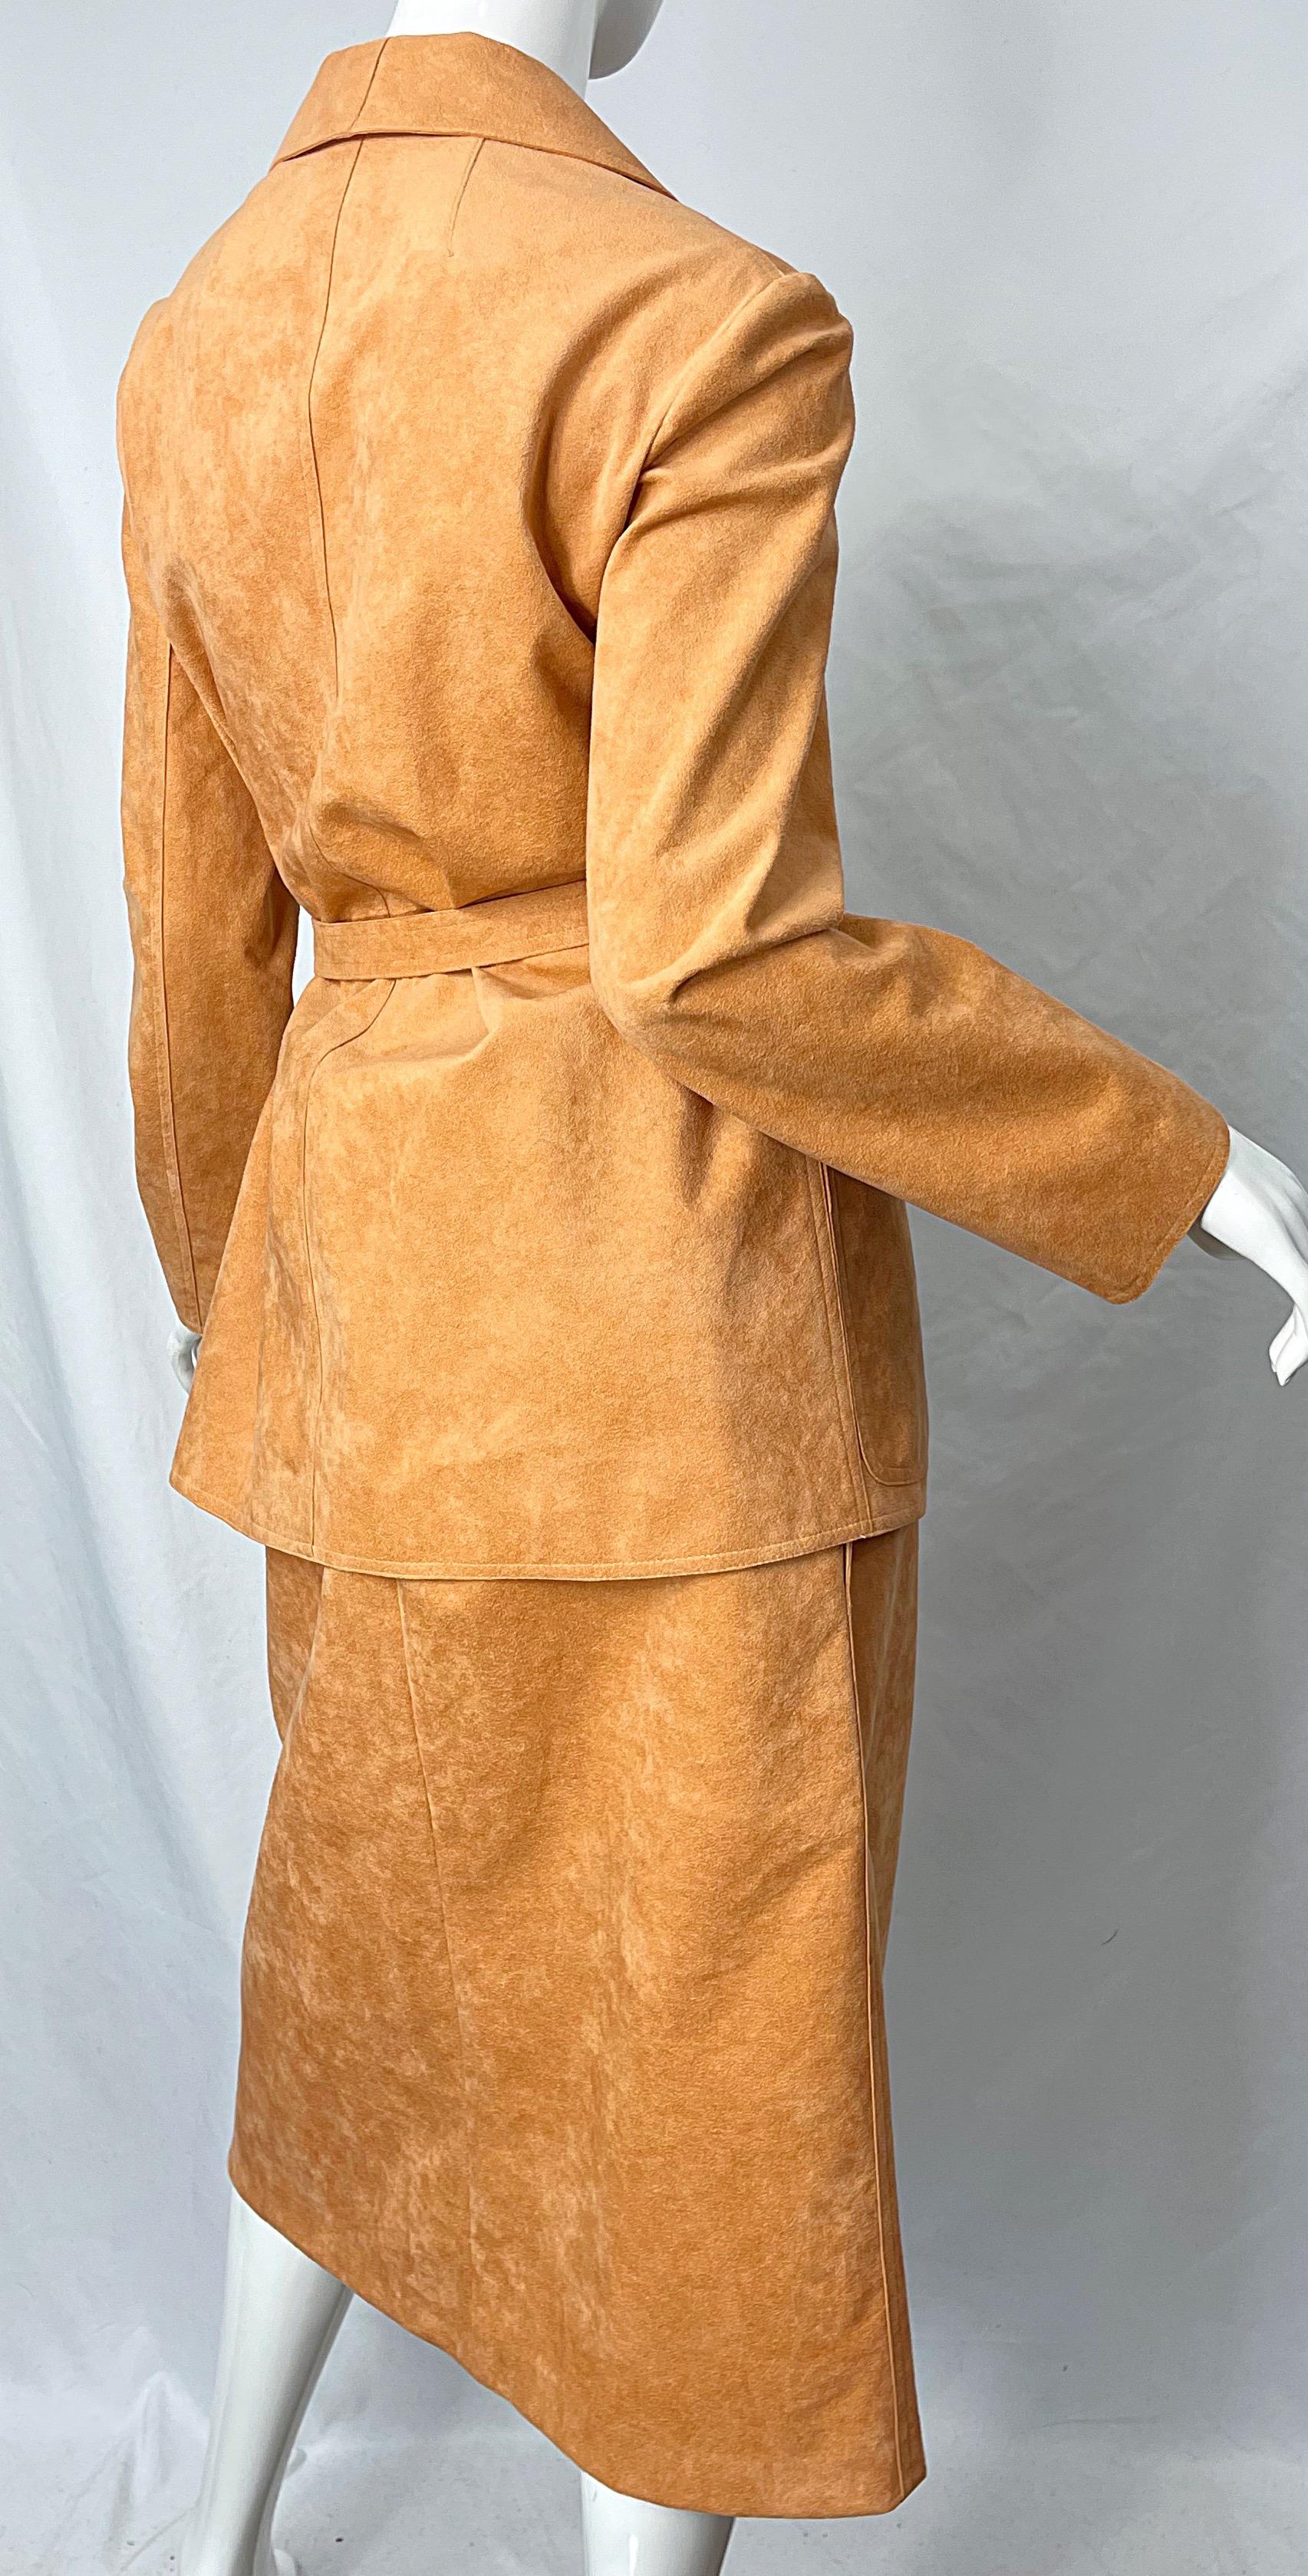 Halston 1970s Salmon Peach Ultrasuede Vintage 70s Belted Jacket and Skirt Suit For Sale 1